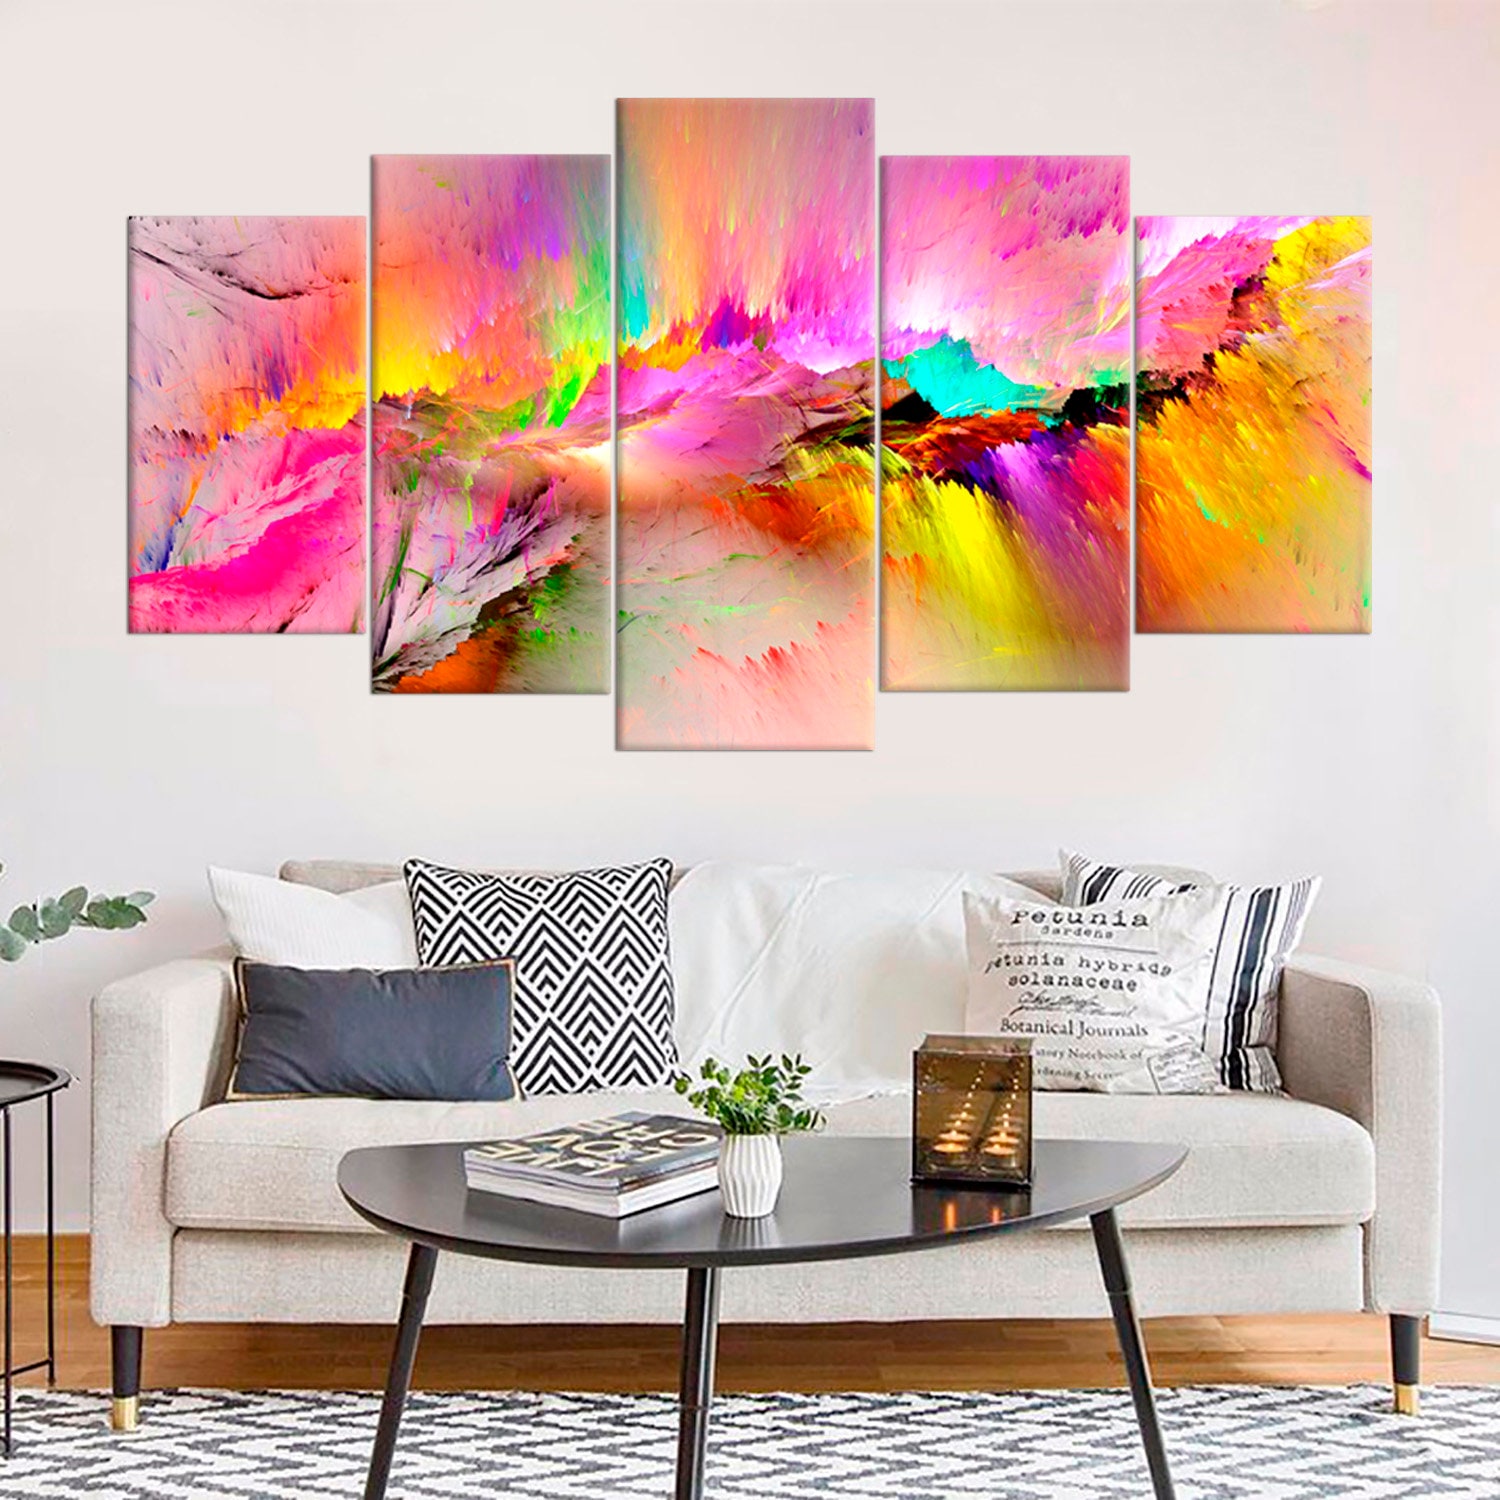 Colorful Abstract Painting Splash Wall Art Decor Canvas Wall | Etsy